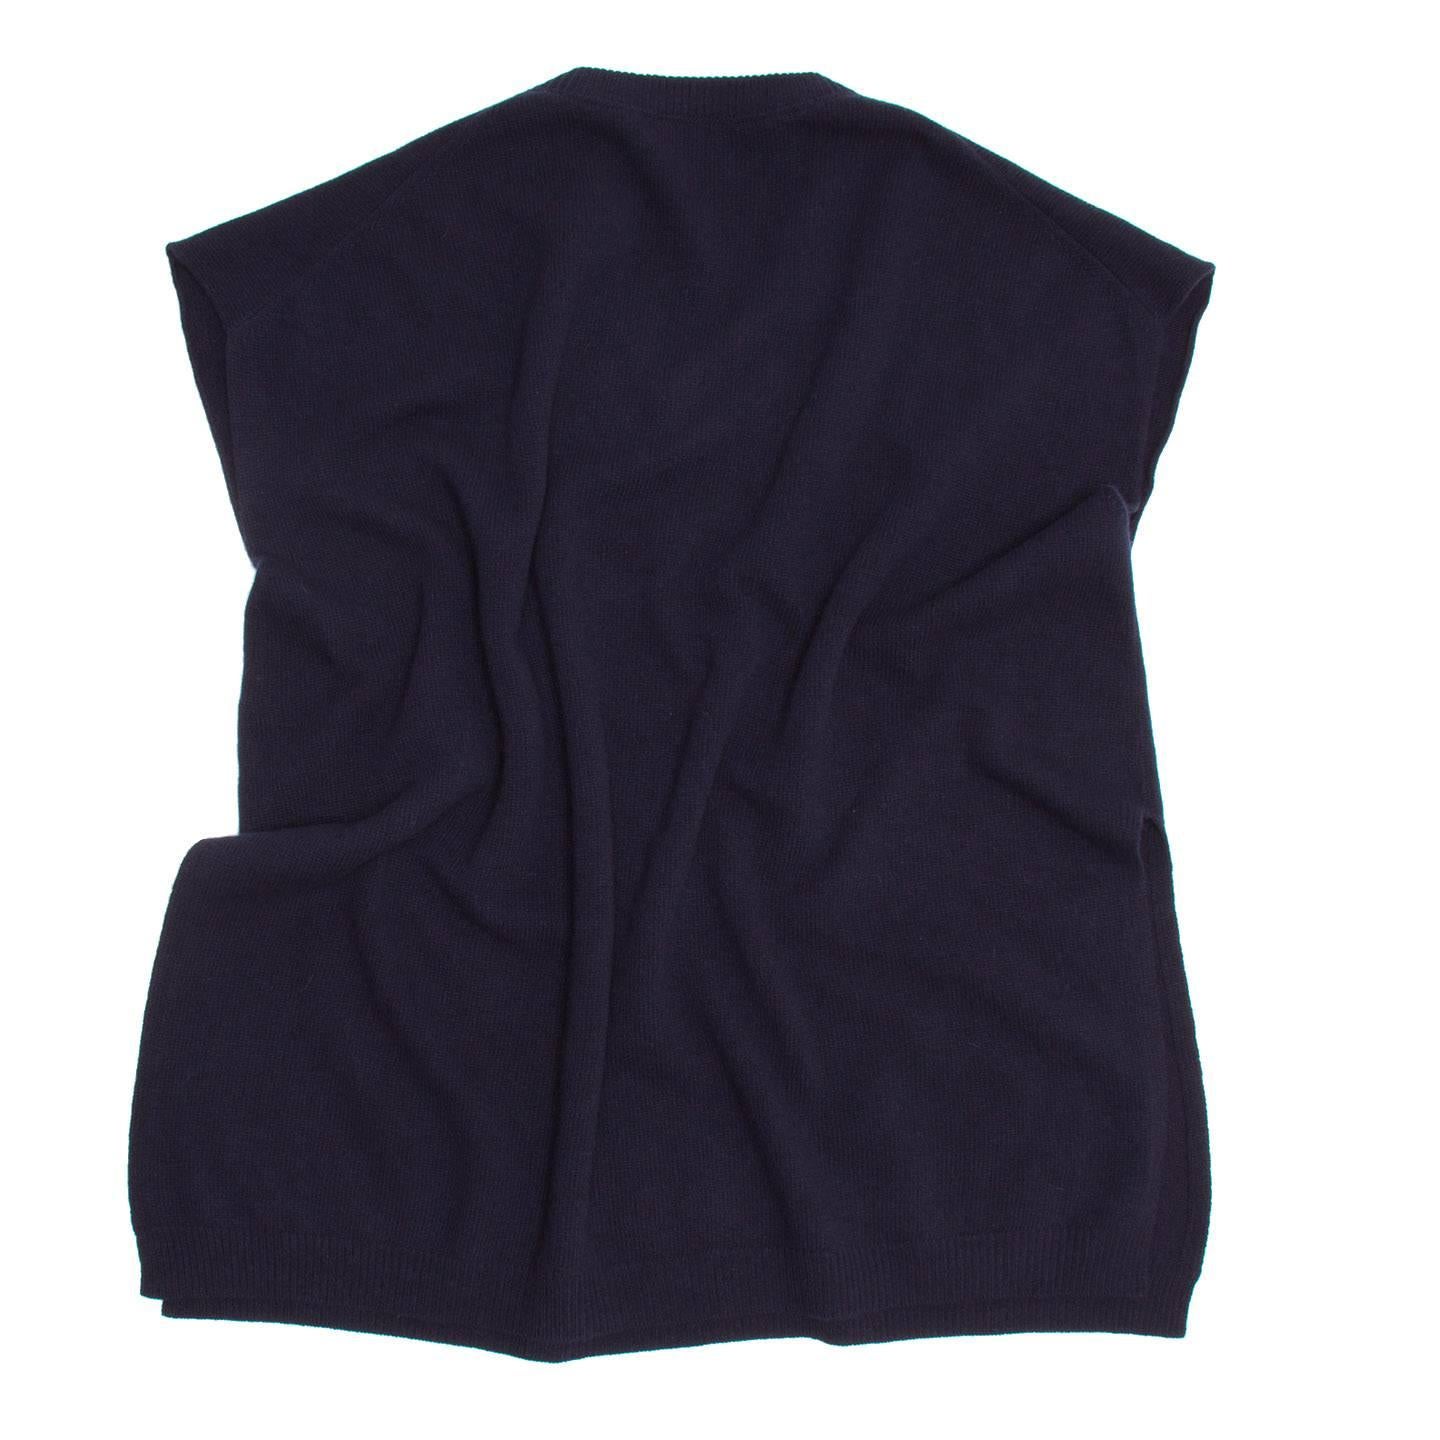 Prada Navy Blue V-Neck Knit Top In New Condition For Sale In Brooklyn, NY